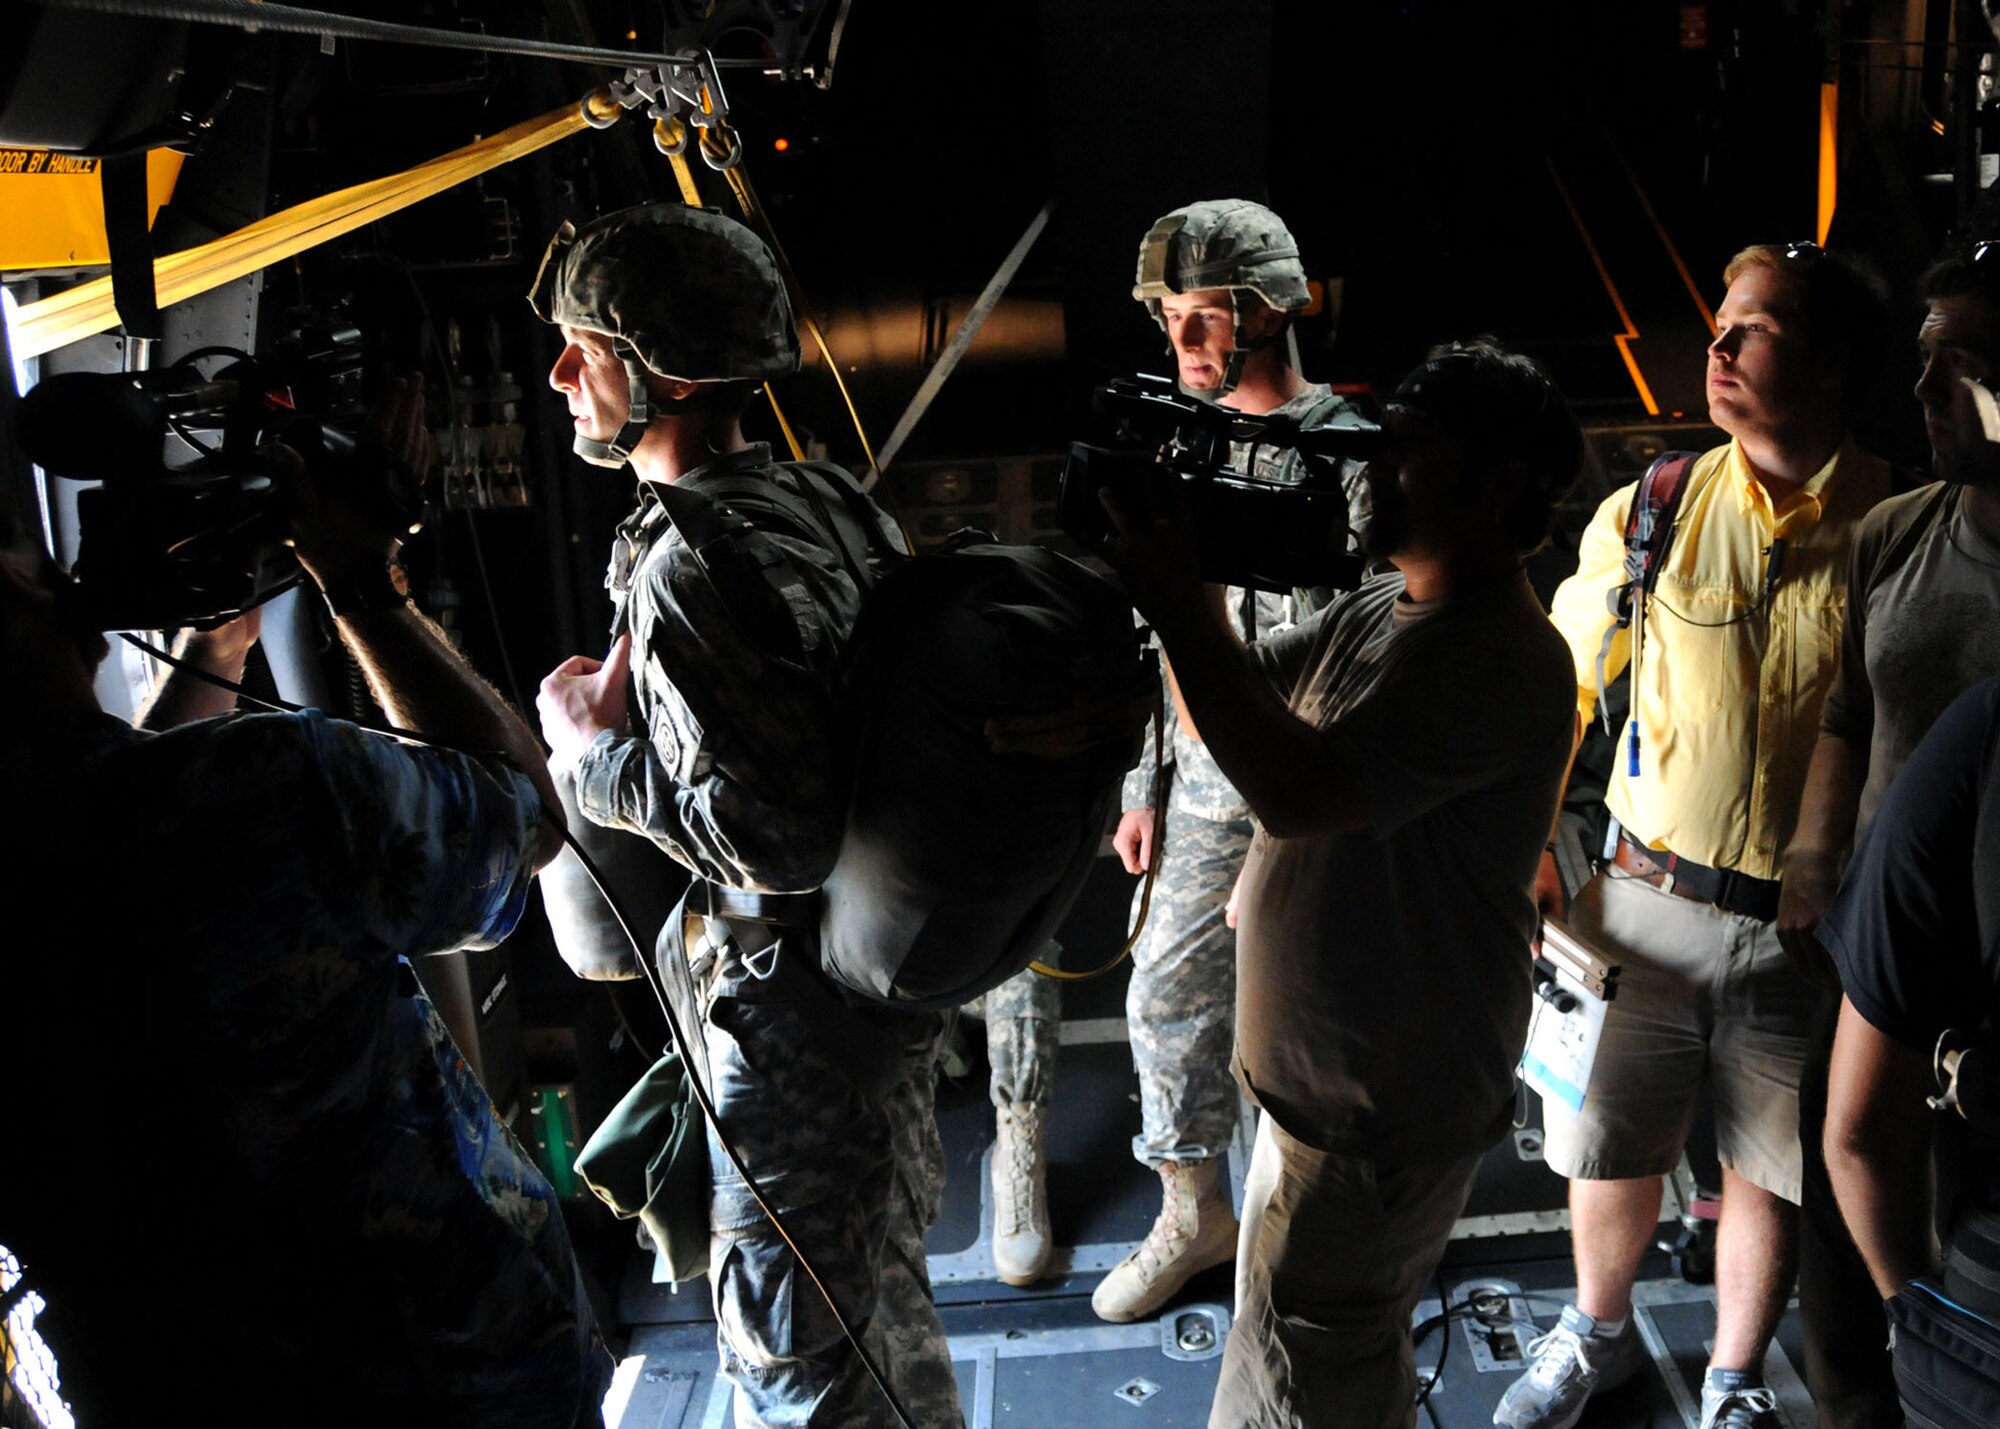 A video crew sets up to record a scene during a simulated jump on the flight line at Duke Field, Fla., June 14.  The production company, WILL Interactive, started work on a choose-your-own-adventure film for Department of Defense jumpmaster training at Fort Benning, Ga., with help from members from the U.S. Army Airborne School. However, when the crew needed a C-130 in portions of the video, the 919th Special Operations Wing offered to support the project at Duke Field June 13-15. (U.S. Air Force photo/Tech. Sgt. Cheryl Foster)